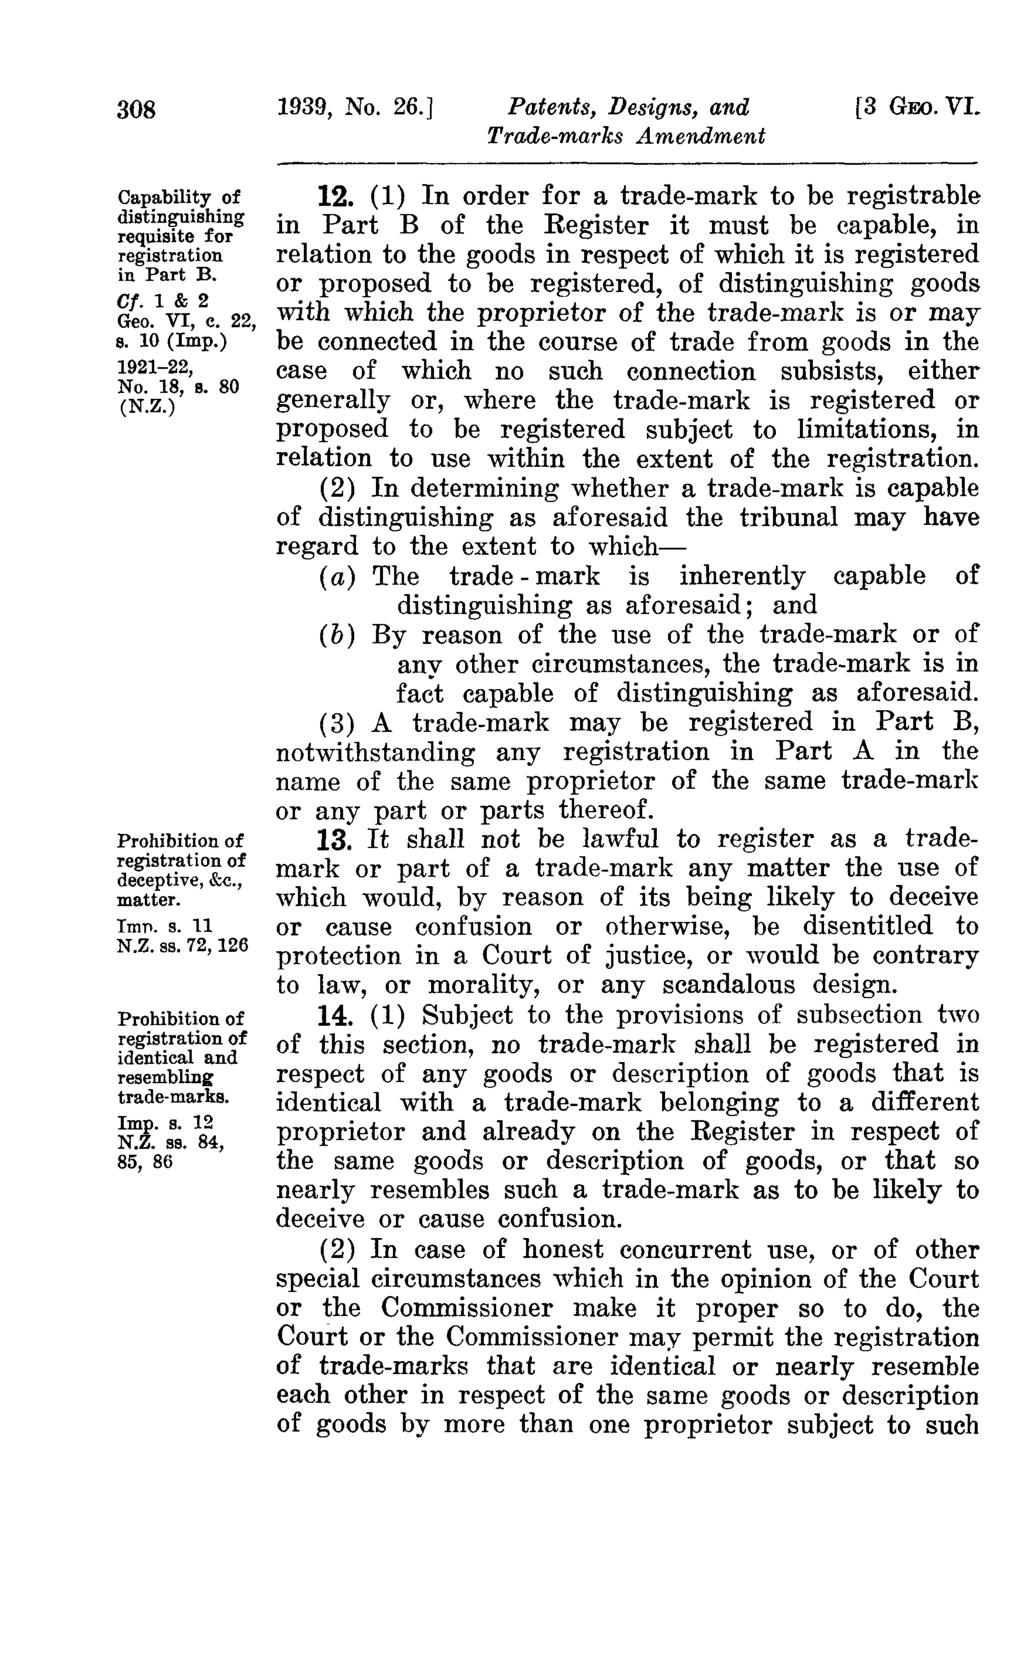 308 1939, No. 26.] Patents, Designs, and [3 GEO. VI. Capability of distinguishing requisite for registration in Part B. Cf. 1 & 2 Geo. VI, c. 22, s. 10 (Imp.) 1921-22, No. 18, 8. 80 (N.Z.